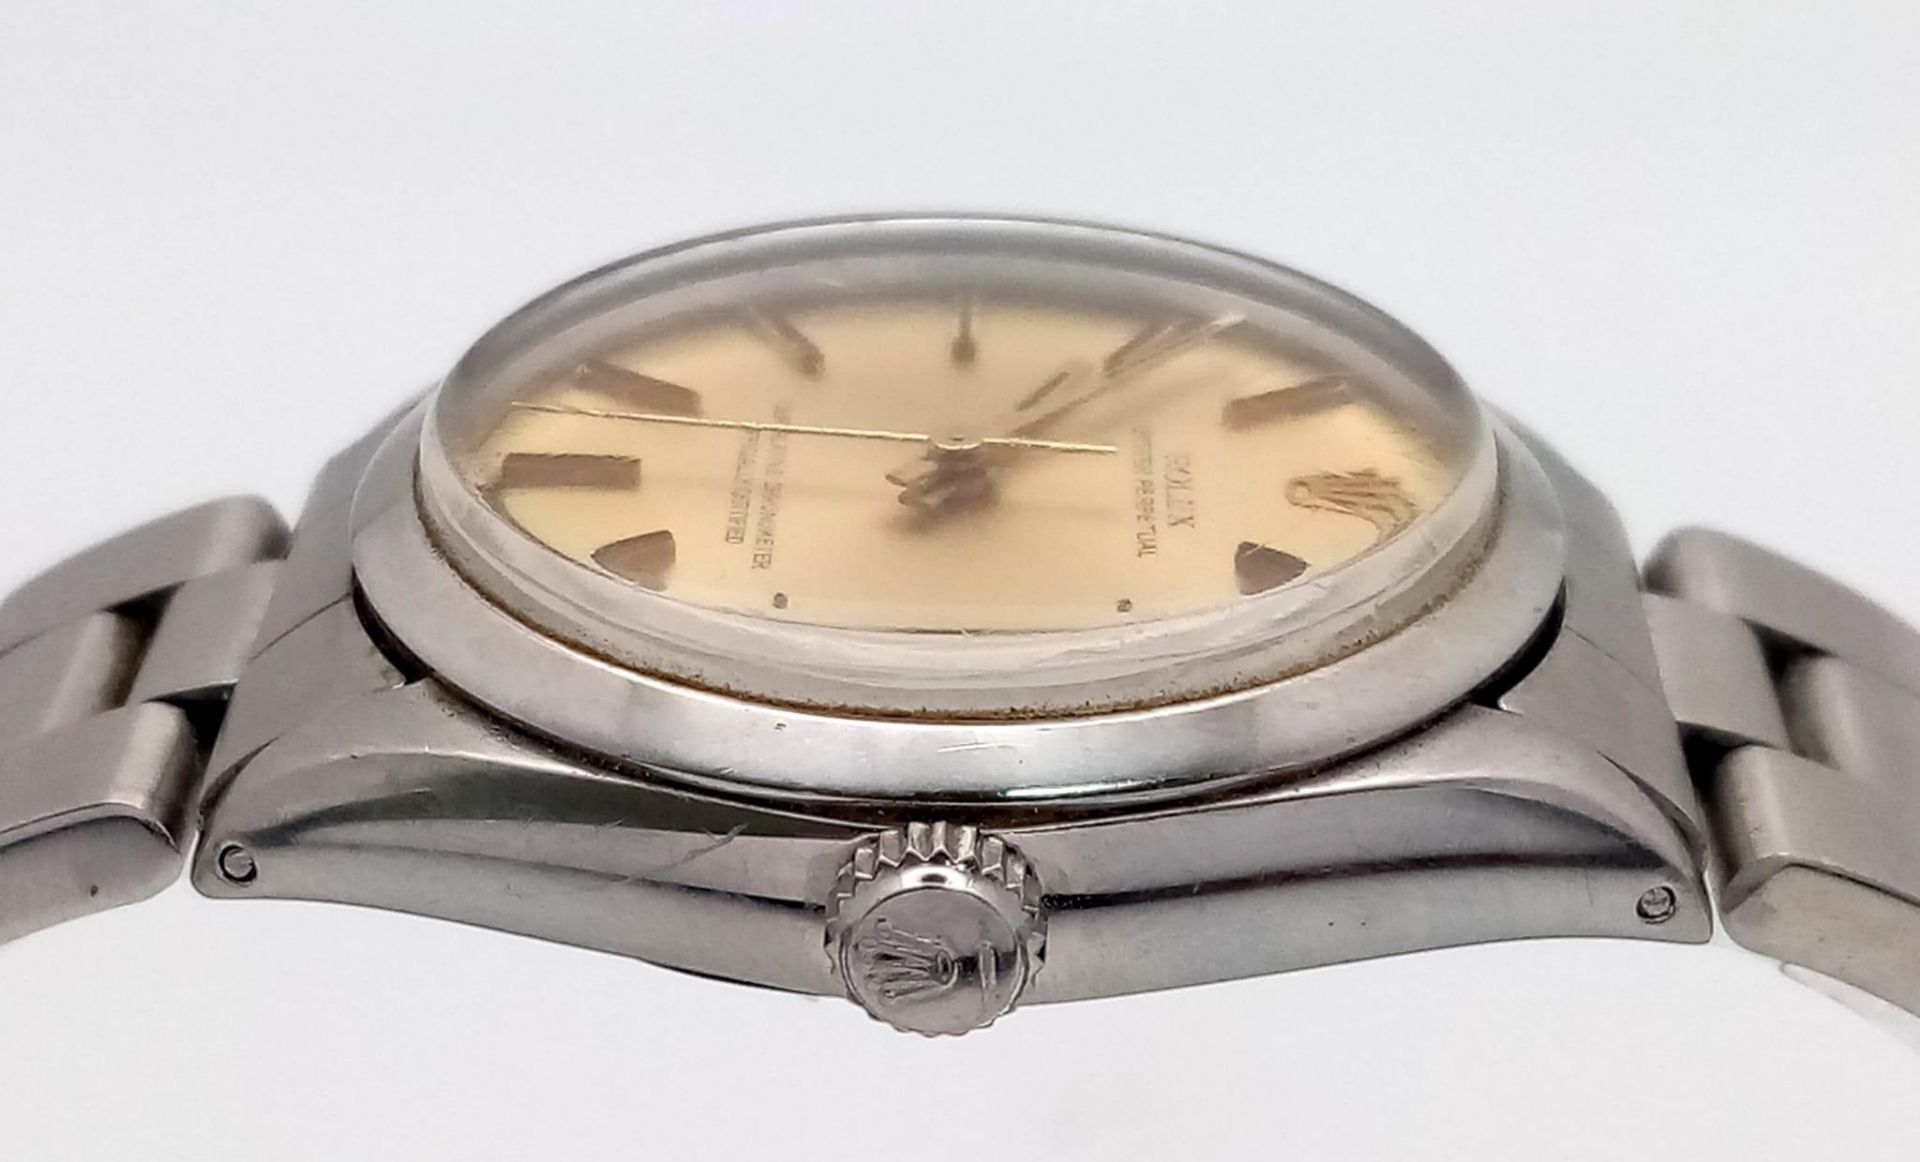 A Vintage Rolex Oyster Perpetual Automatic Gents Watch. Stainless steel bracelet and case - 34mm. - Bild 4 aus 7